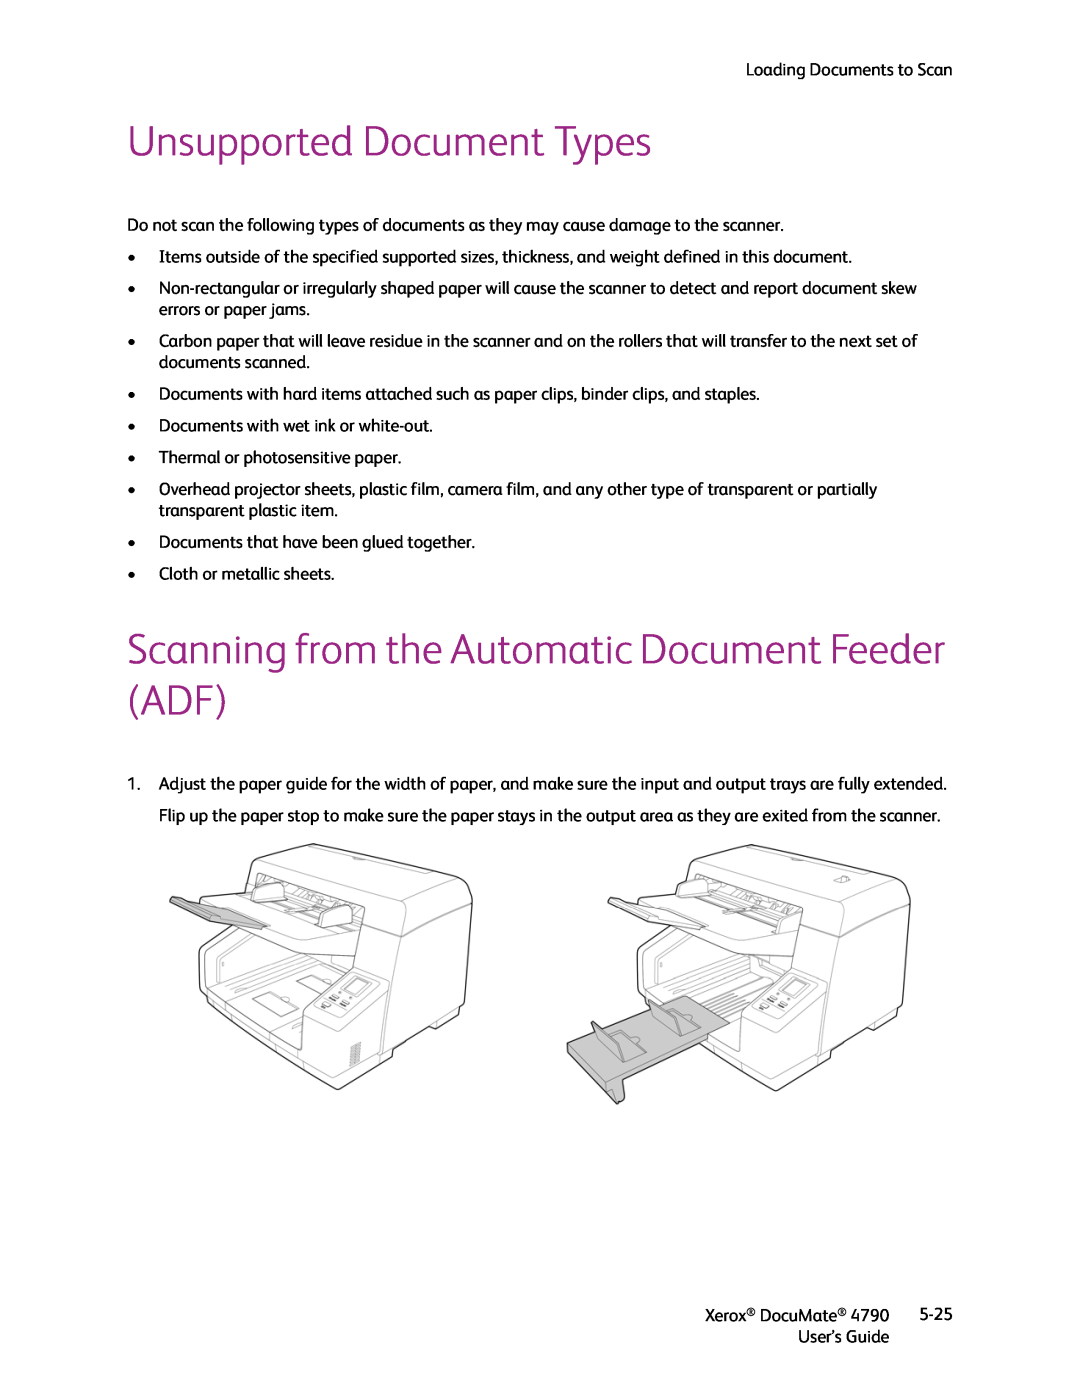 Xerox xerox documate manual Unsupported Document Types, Scanning from the Automatic Document Feeder ADF 